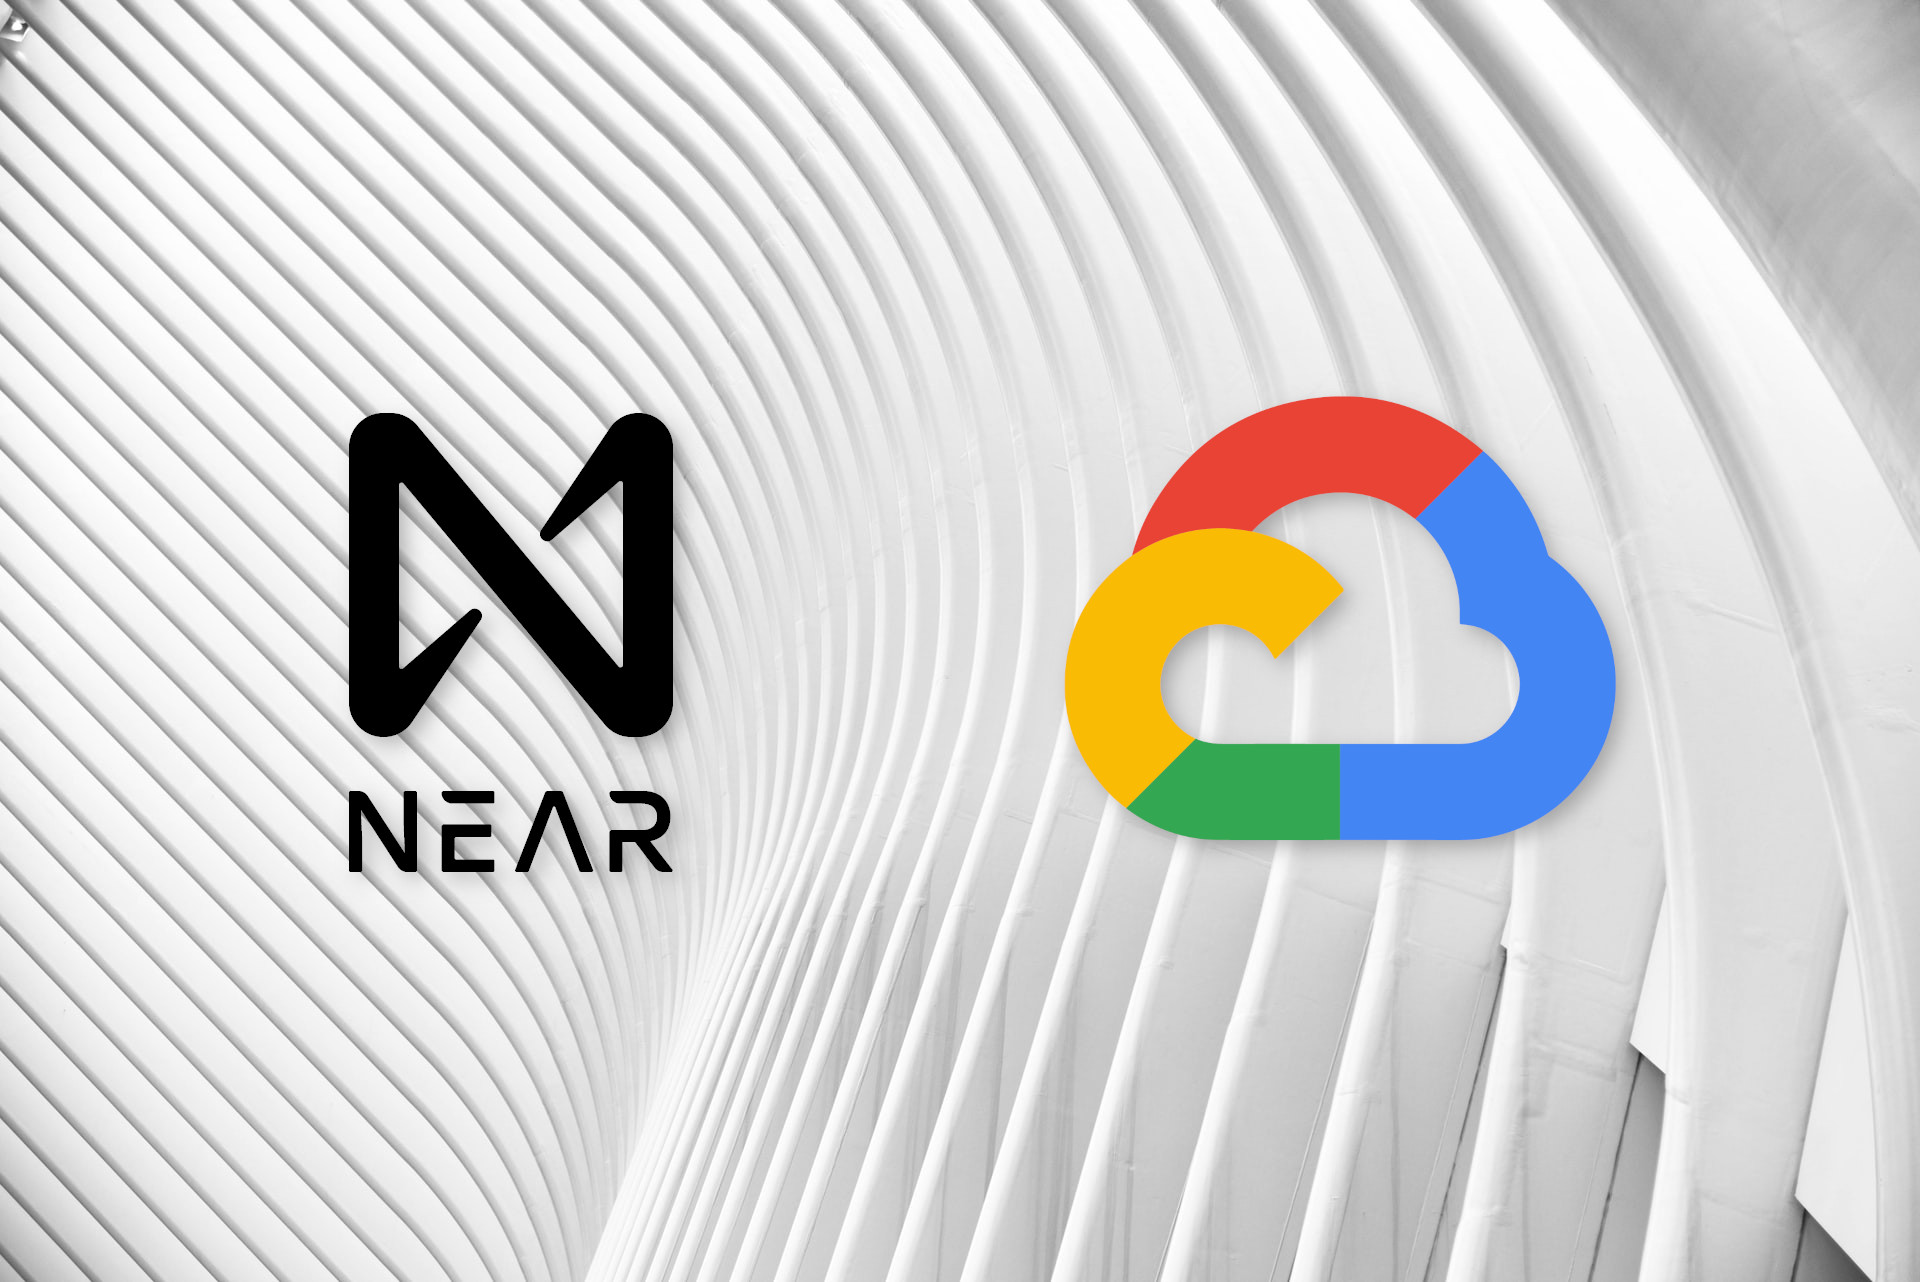 NEAR Foundation Joins Forces With Google Cloud to Support Web3 Developers